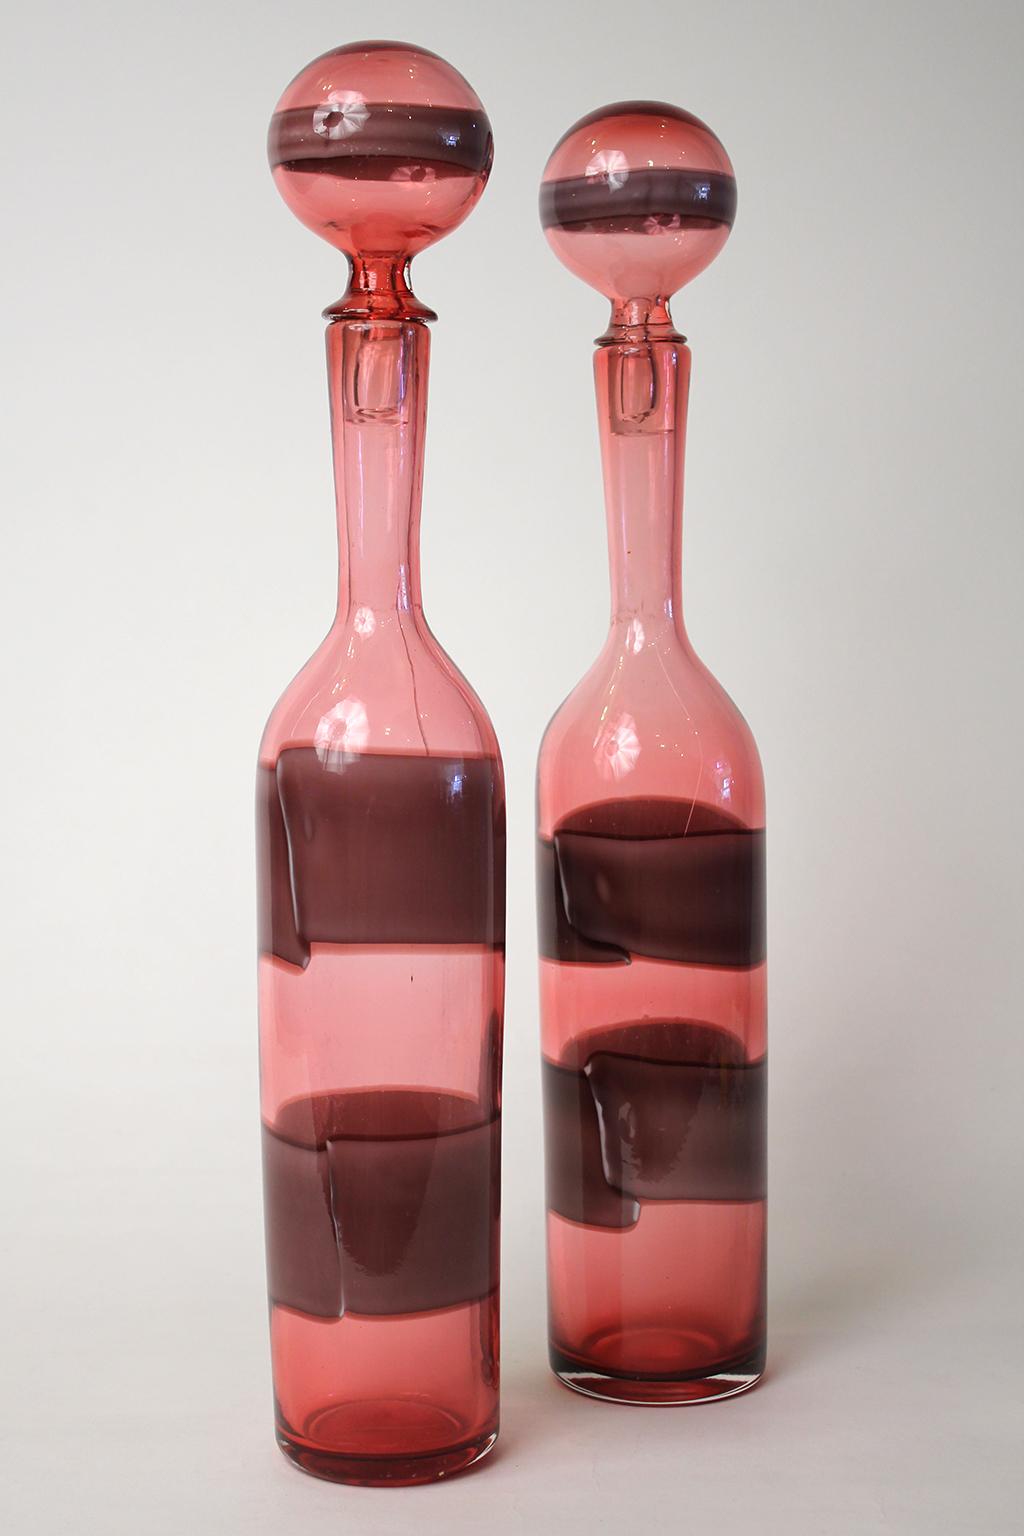 Beautiful pair of matching Fasce Orizzontali bottles with stoppers by Fulvio Bianconi for Venini. Seldom seen color. Both bottle have faint hairline cracks that almost appear to be original from when they were made. Please see photos. There are no